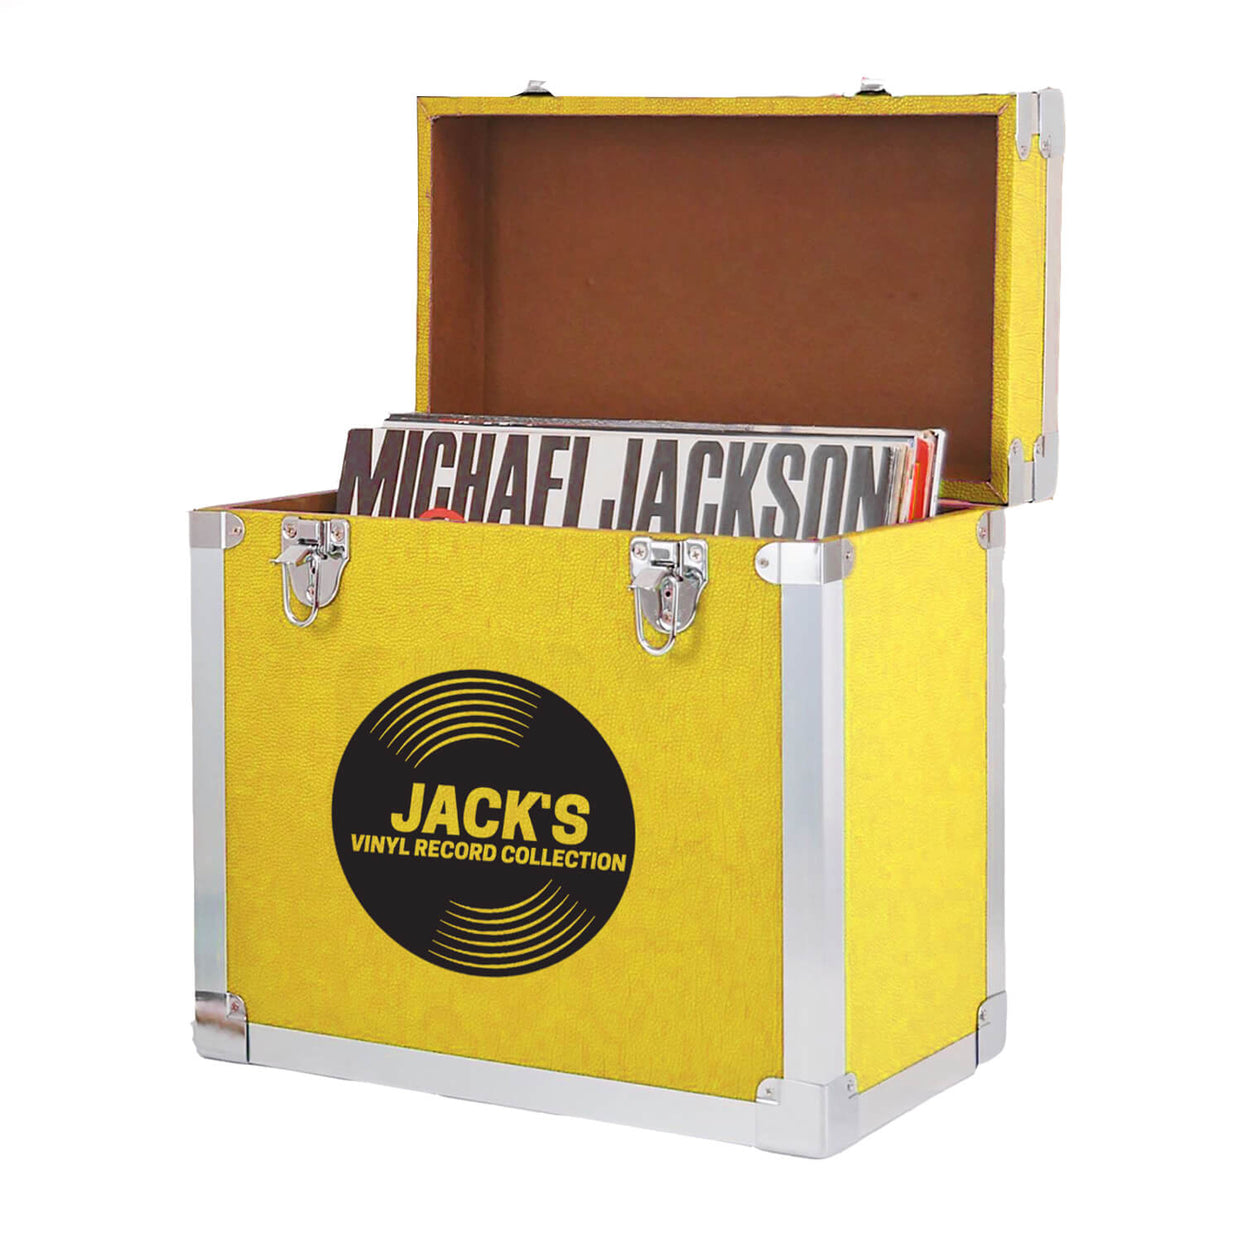 Personalised Music Record Vinyl Storage Box - 12 inch - Yellow Vinyl finish - Stores up to 50 records